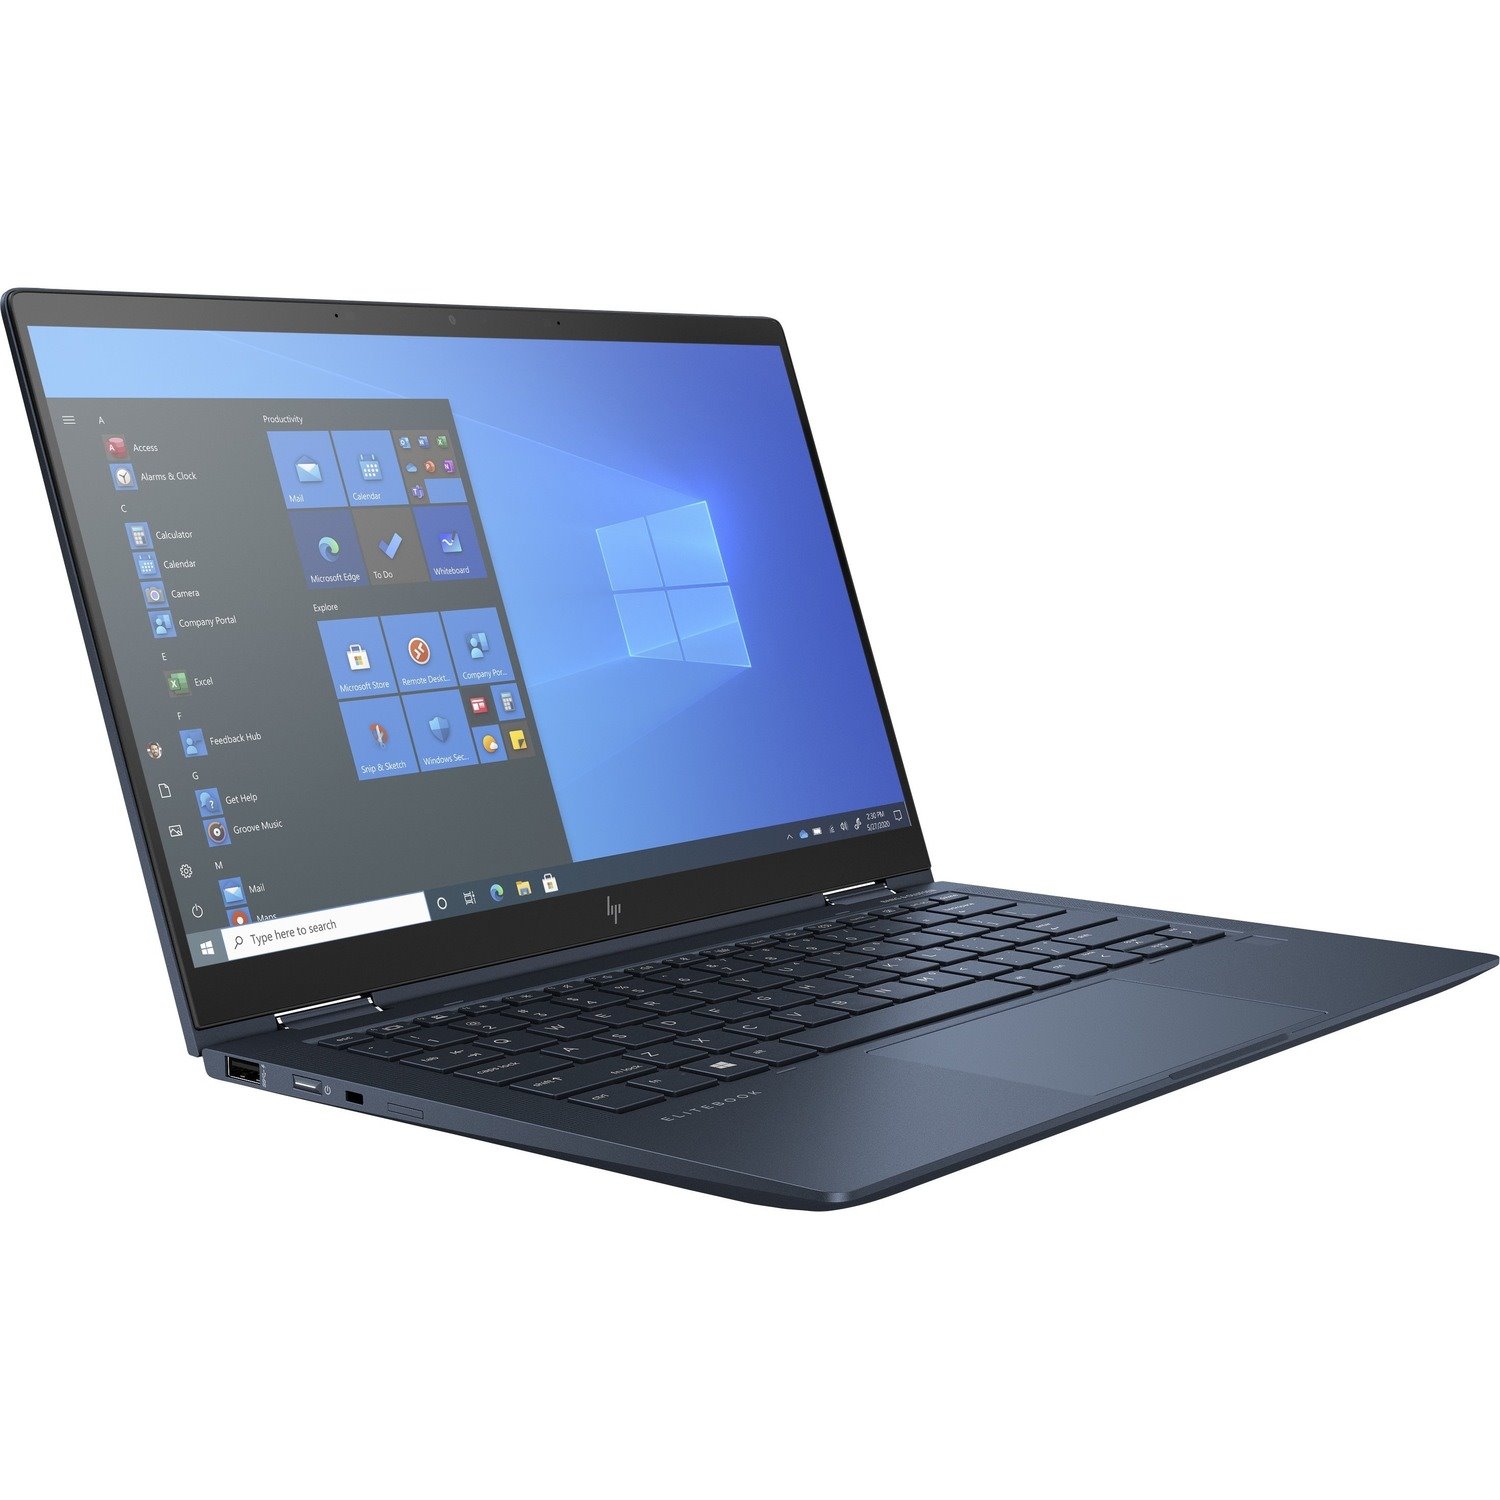 HP Elite Dragonfly G2 LTE Advanced 13.3" Touchscreen Convertible 2 in 1 Notebook - Full HD - 1920 x 1080 - Intel Core i7 11th Gen i7-1185G7 Quad-core (4 Core) 3 GHz - 16 GB Total RAM - 512 GB SSD